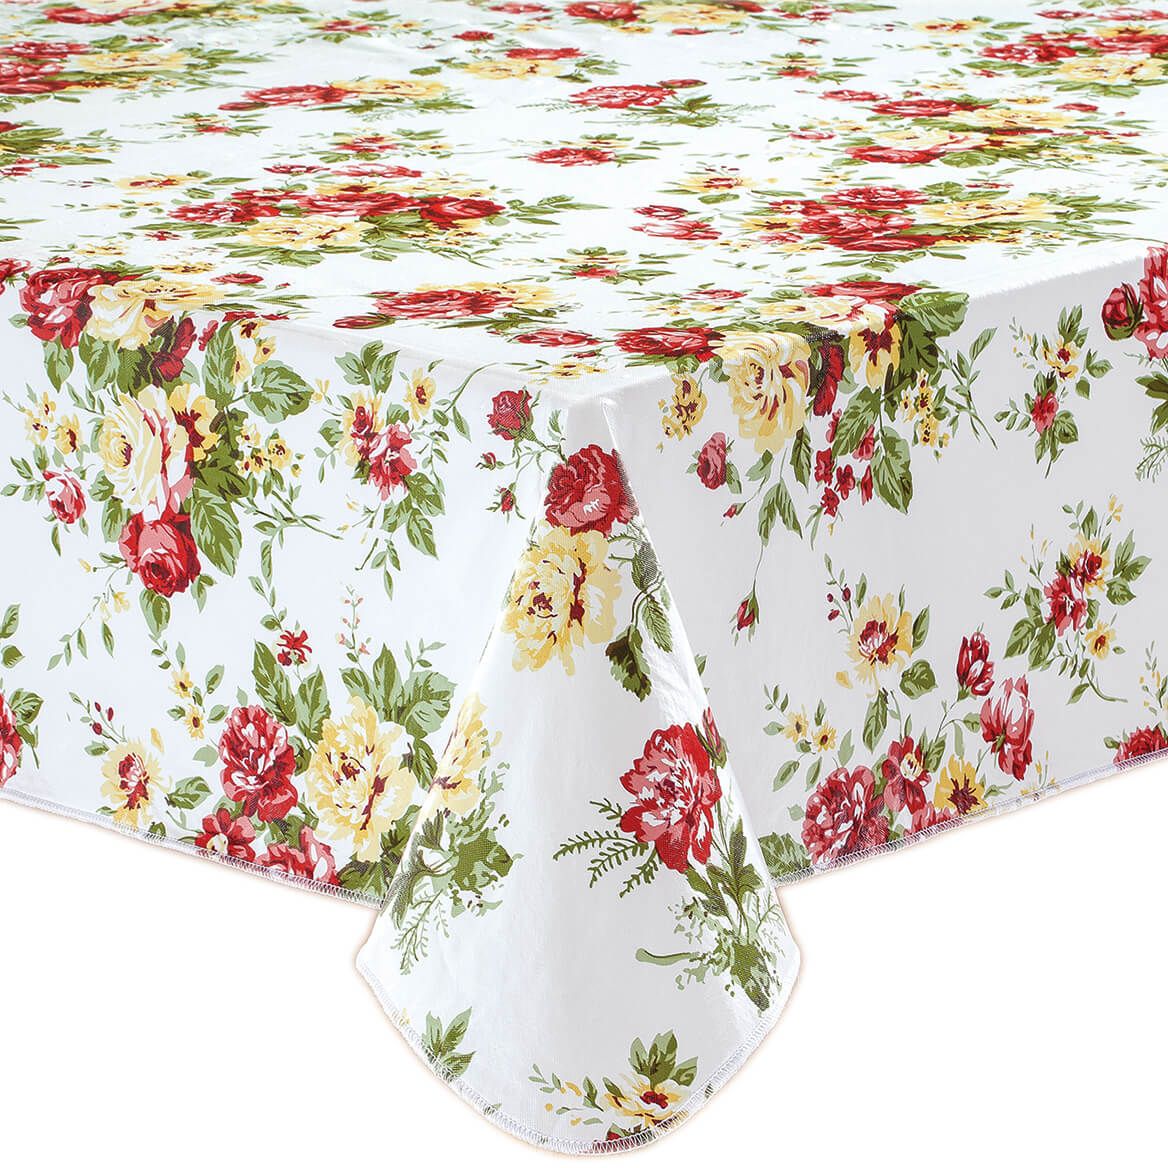 Country Rose Vinyl Table Cover by Chef's Pride + '-' + 368834